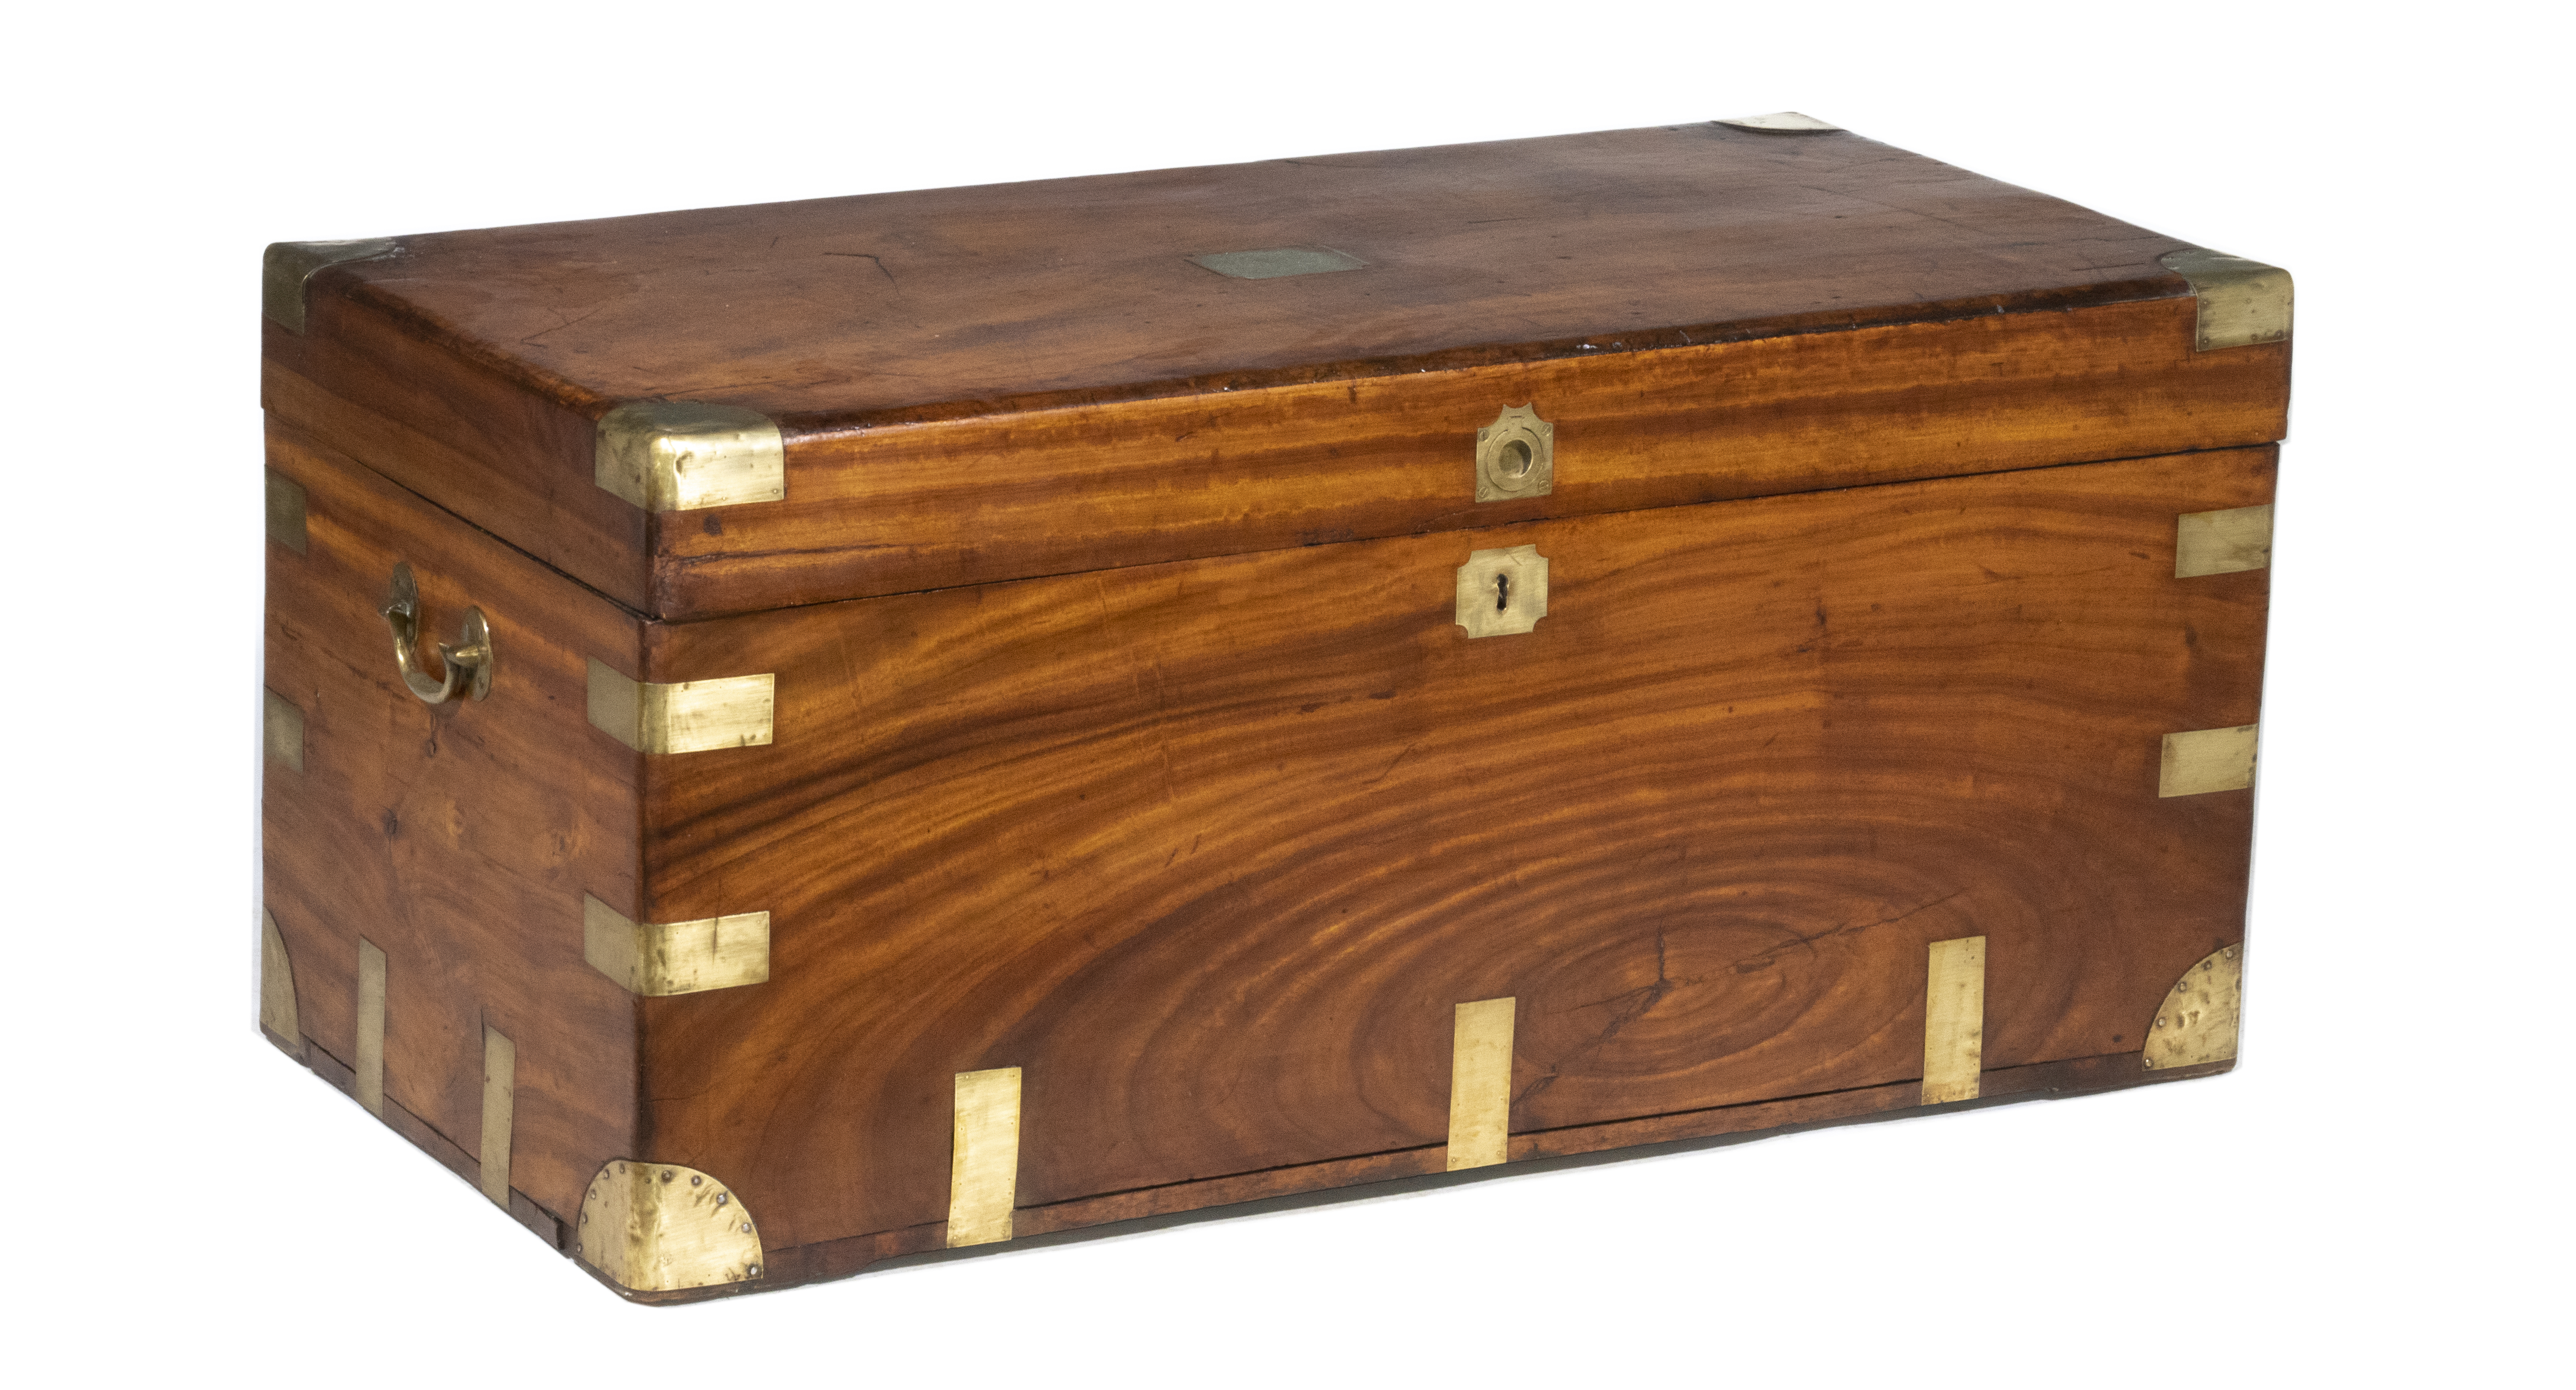 CAMPHORWOOD TRUNK 19th c. Chinese